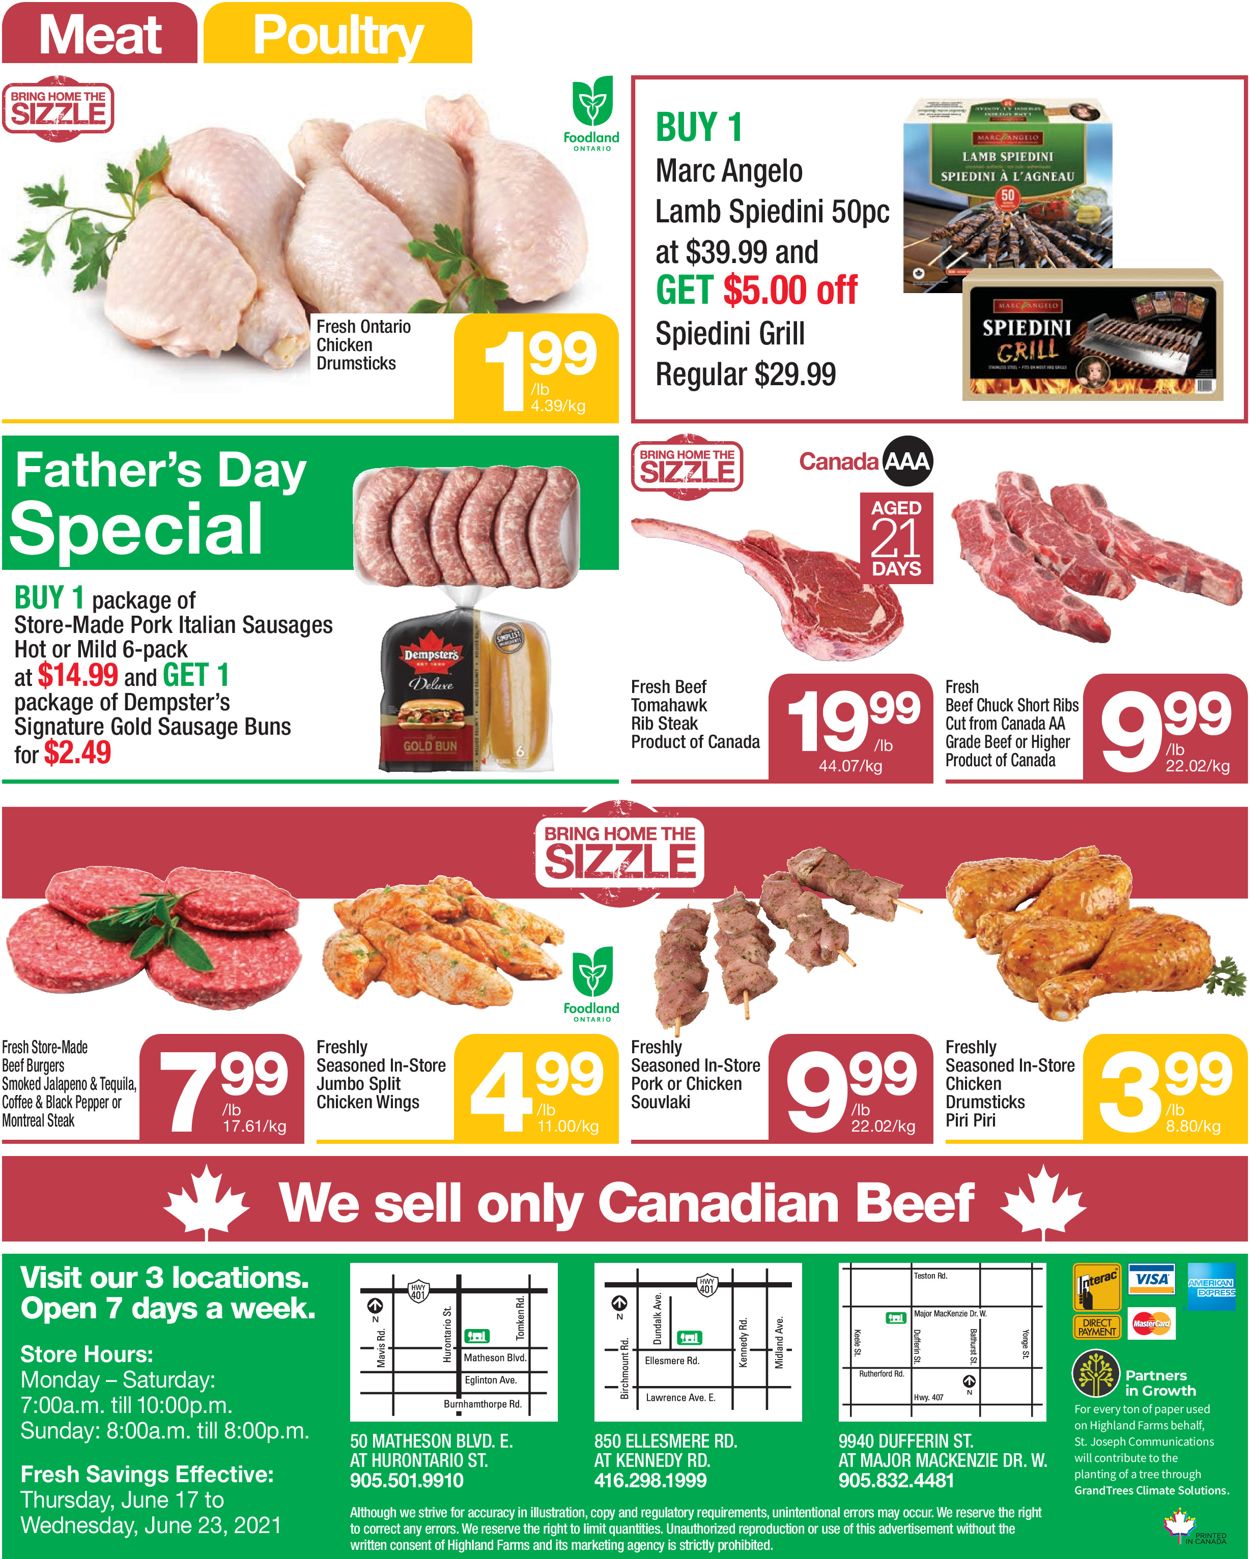 Highland Farms Flyer from 06/17/2021